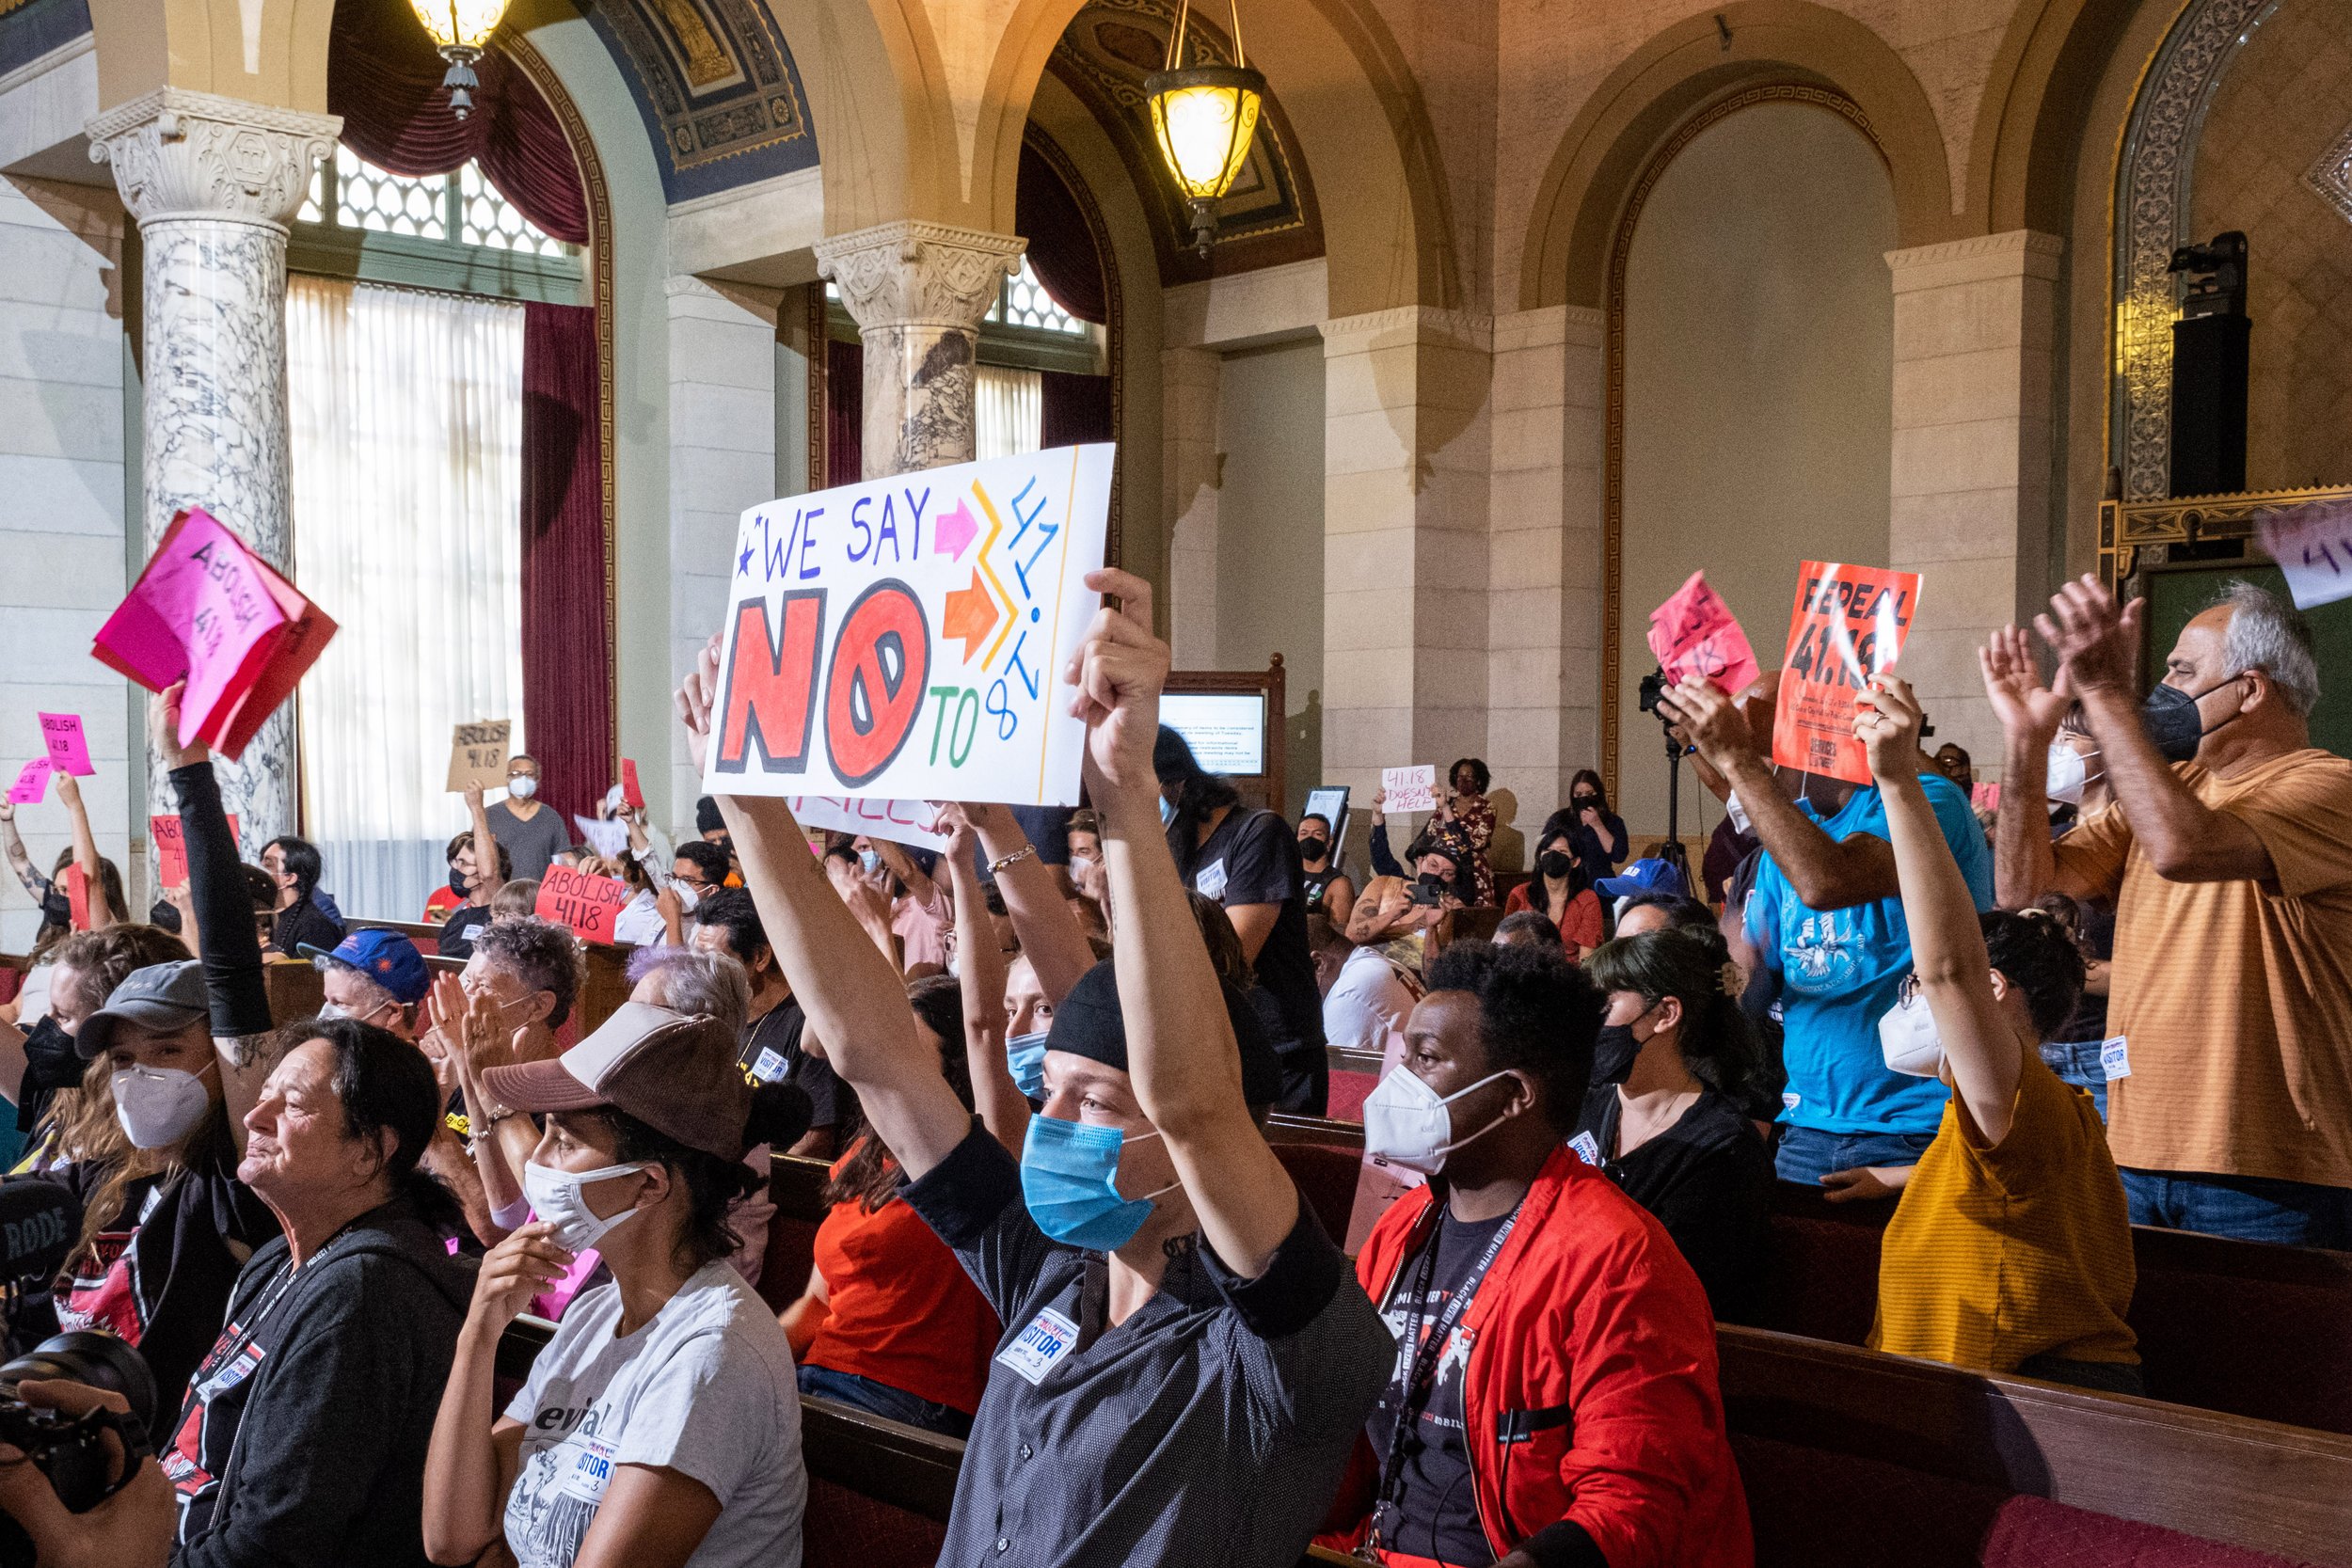  Los Angeles community members and activists gather inside of City Hall for a public hearing. The room is filled with signs and shouts in dissent of the new amendment that would later be passed in an 11-3 vote by the Los Angeles City Council members.